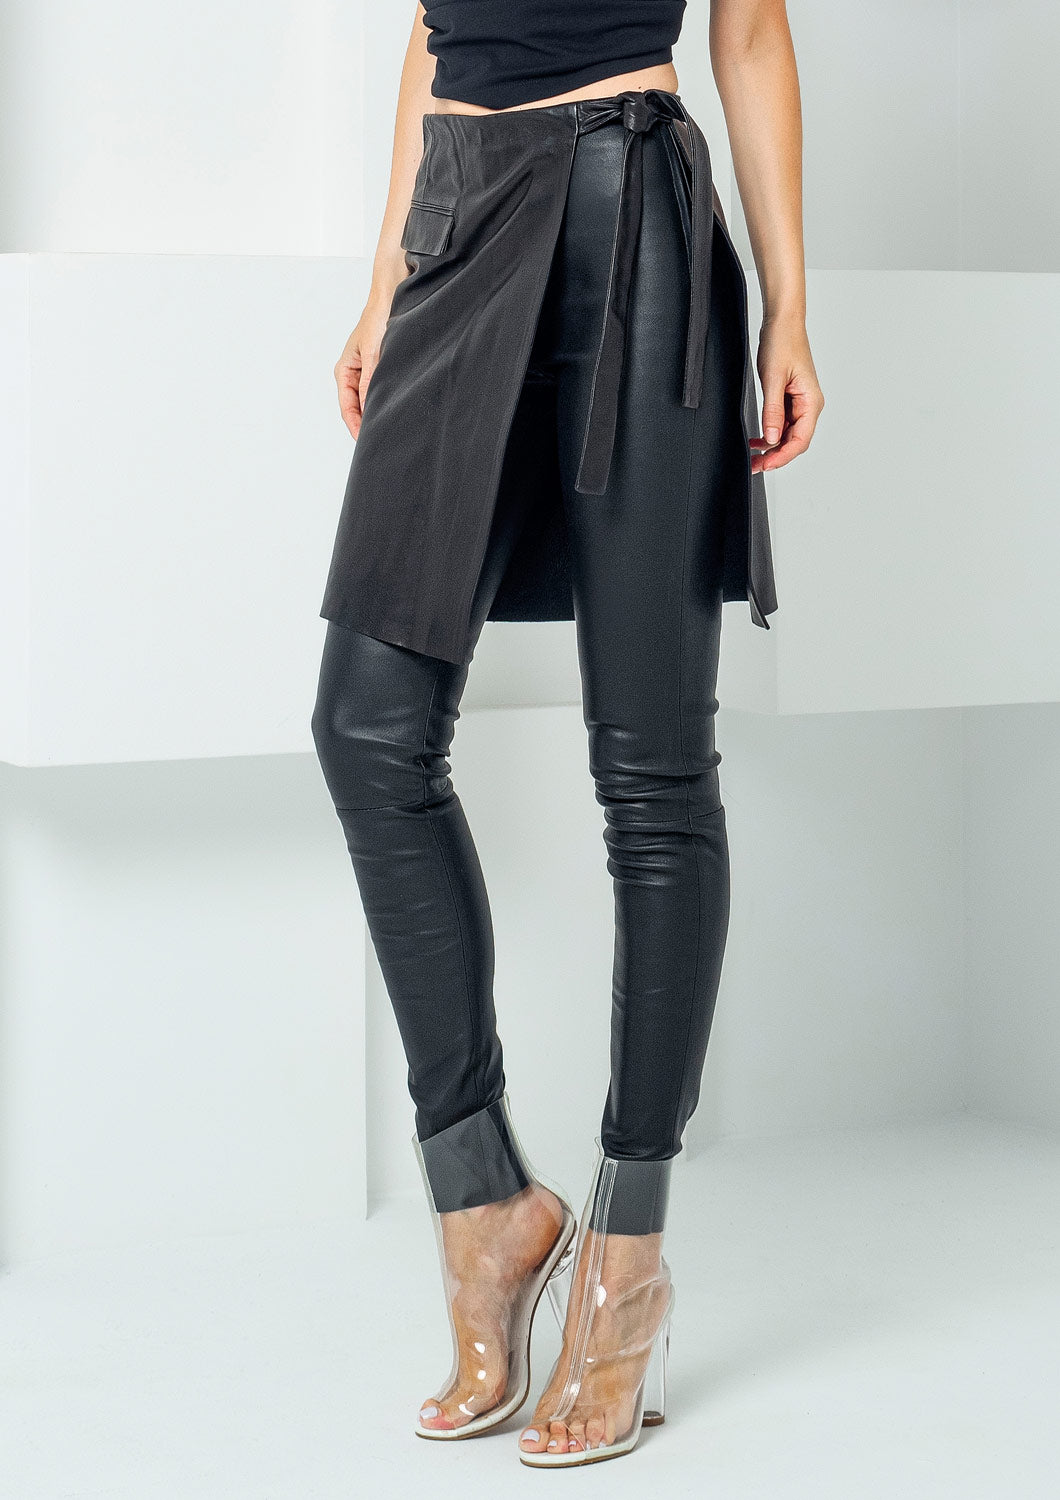 Leather stretch leggings with skirt